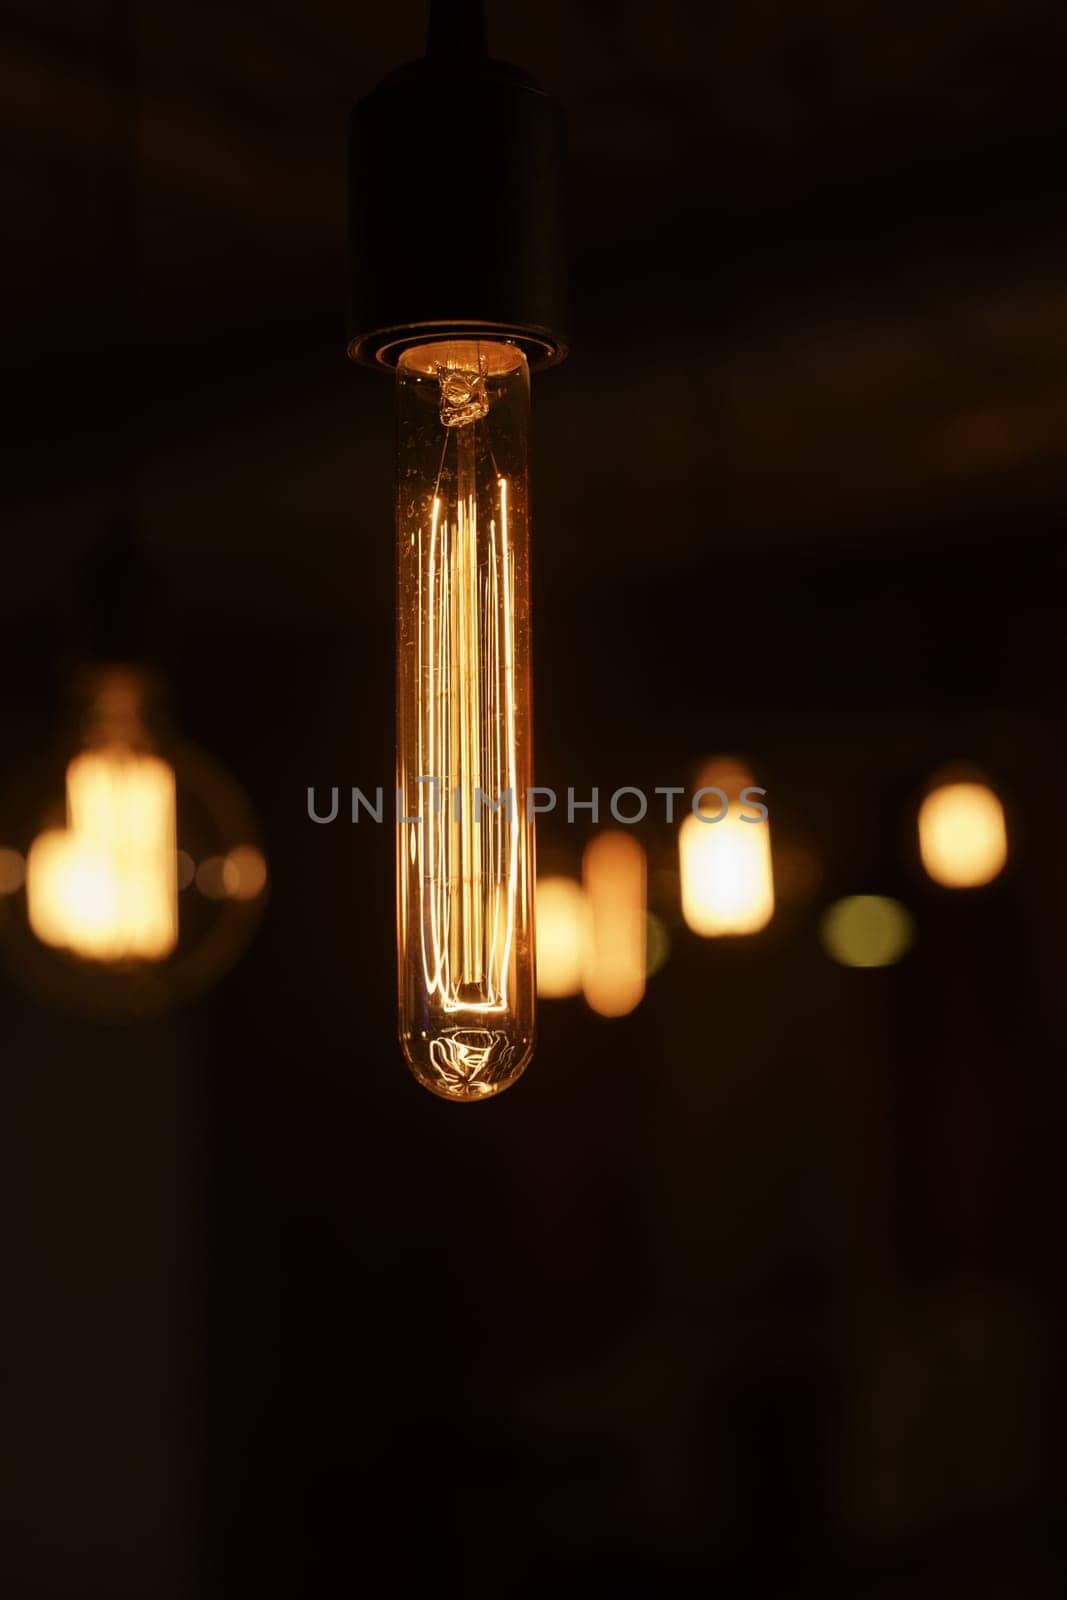 Image of elongated filament lamp, close-up by rivertime